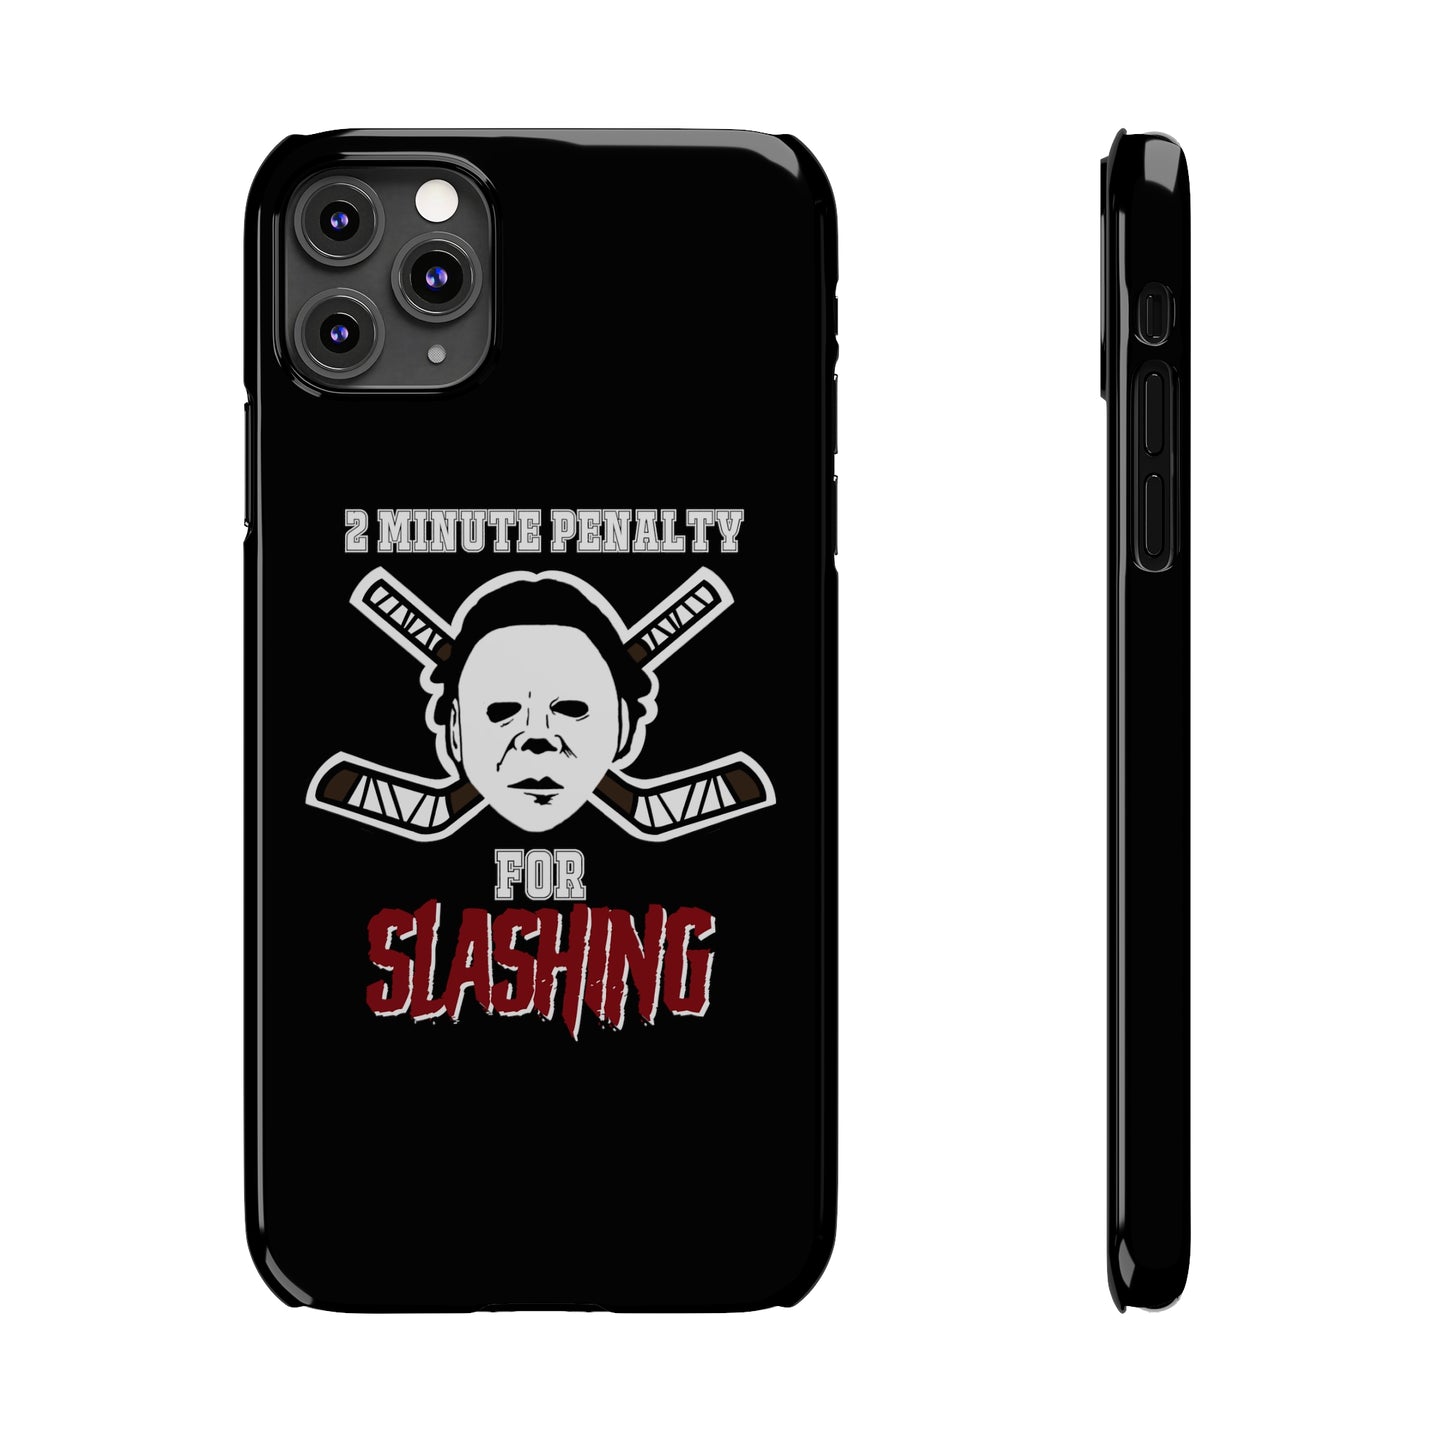 Myers Penalty Phone Case